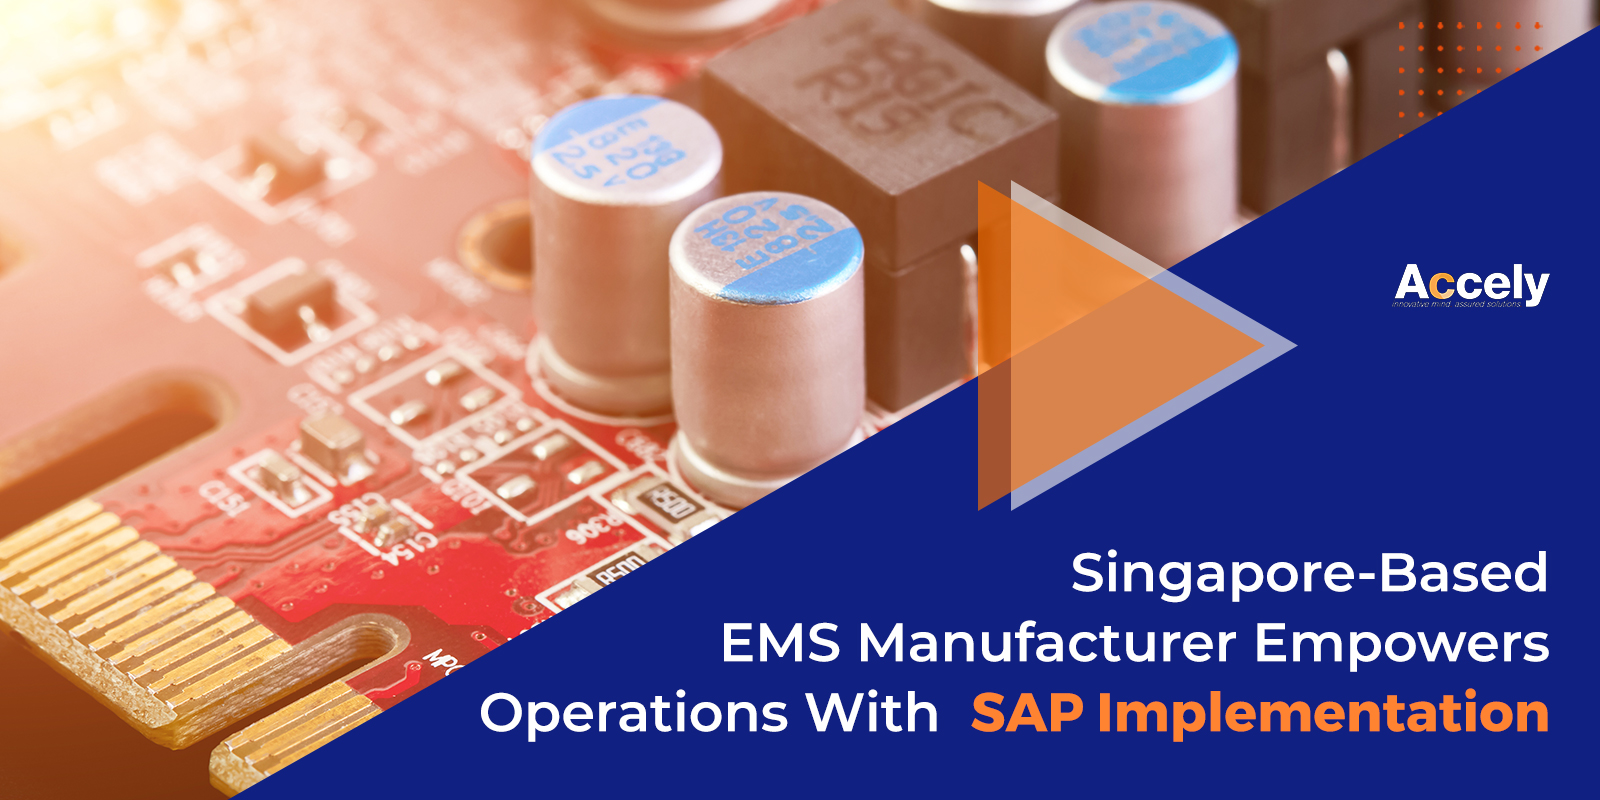 Singapore-Based EMS Manufacturer Empowers Operations With SAP Implementation